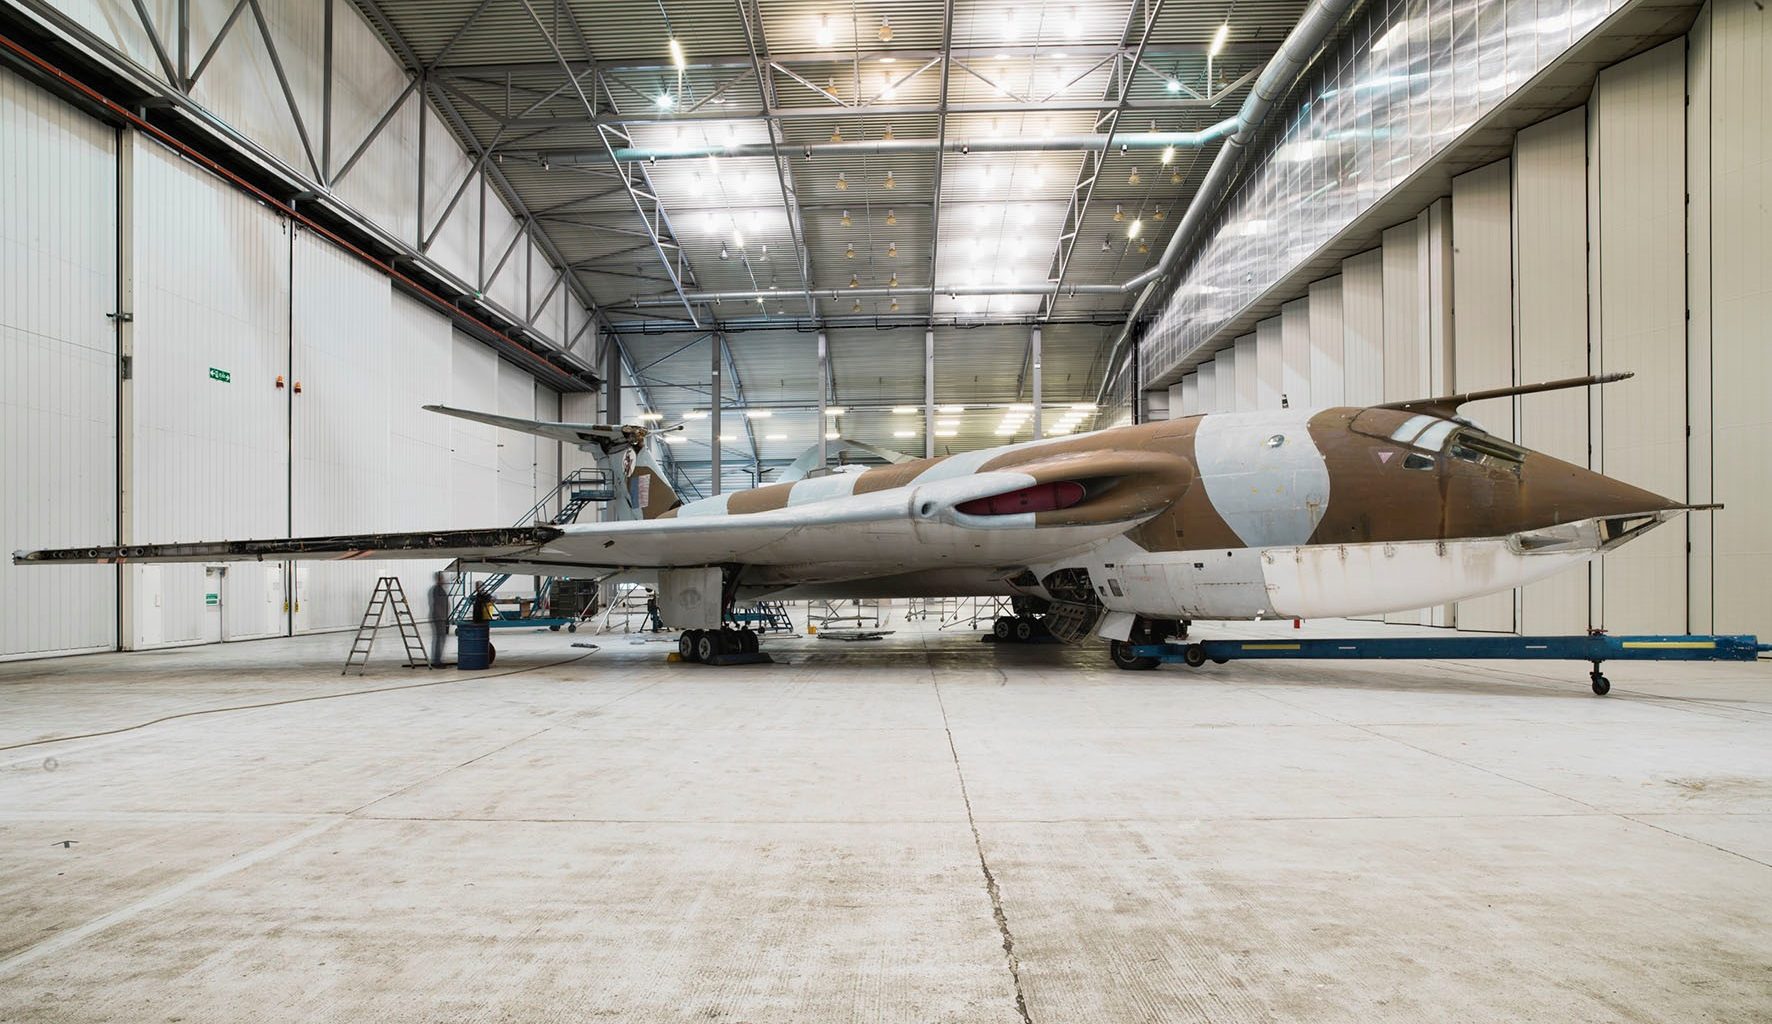 The only remaining Handley Page Victor aircraft has been reassembled and displayed at the Imperial War Museum Duxford, following its five-year restoration.